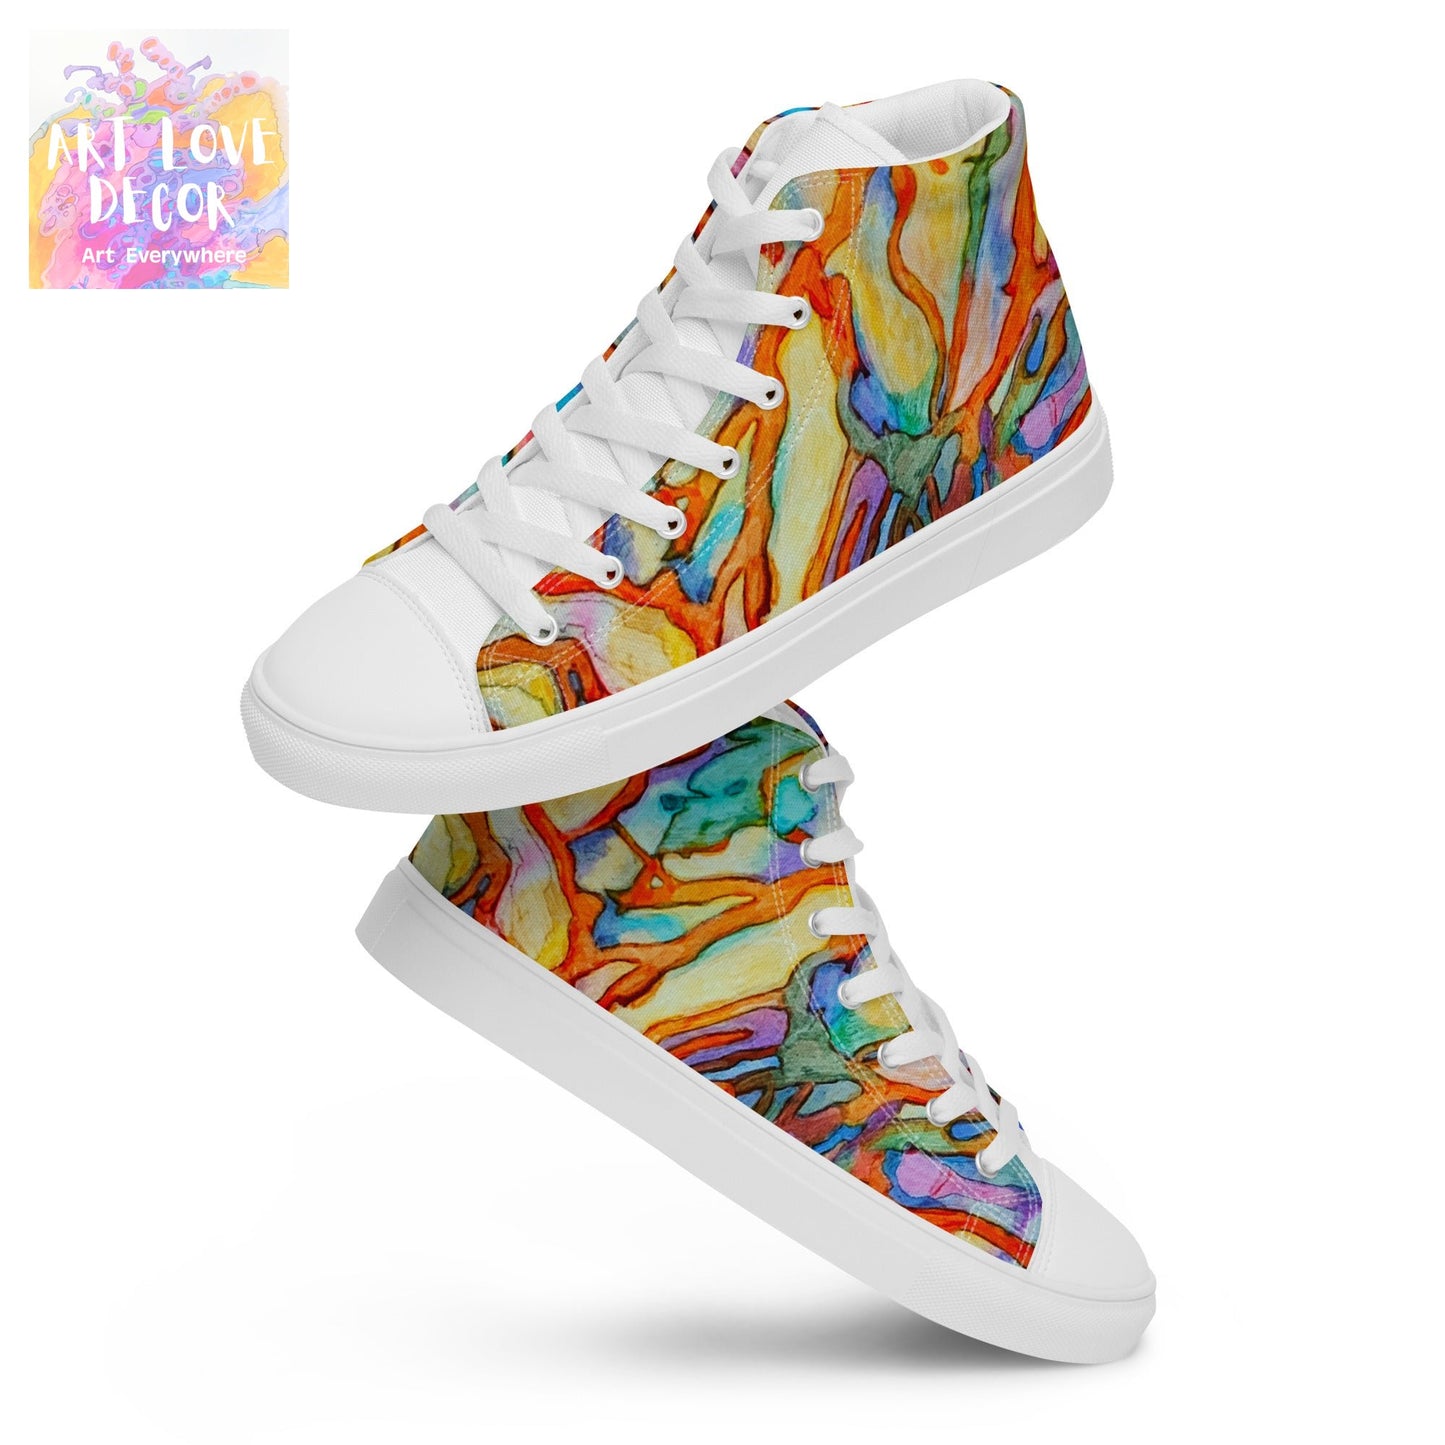 Coral Reef Women’s high top shoes